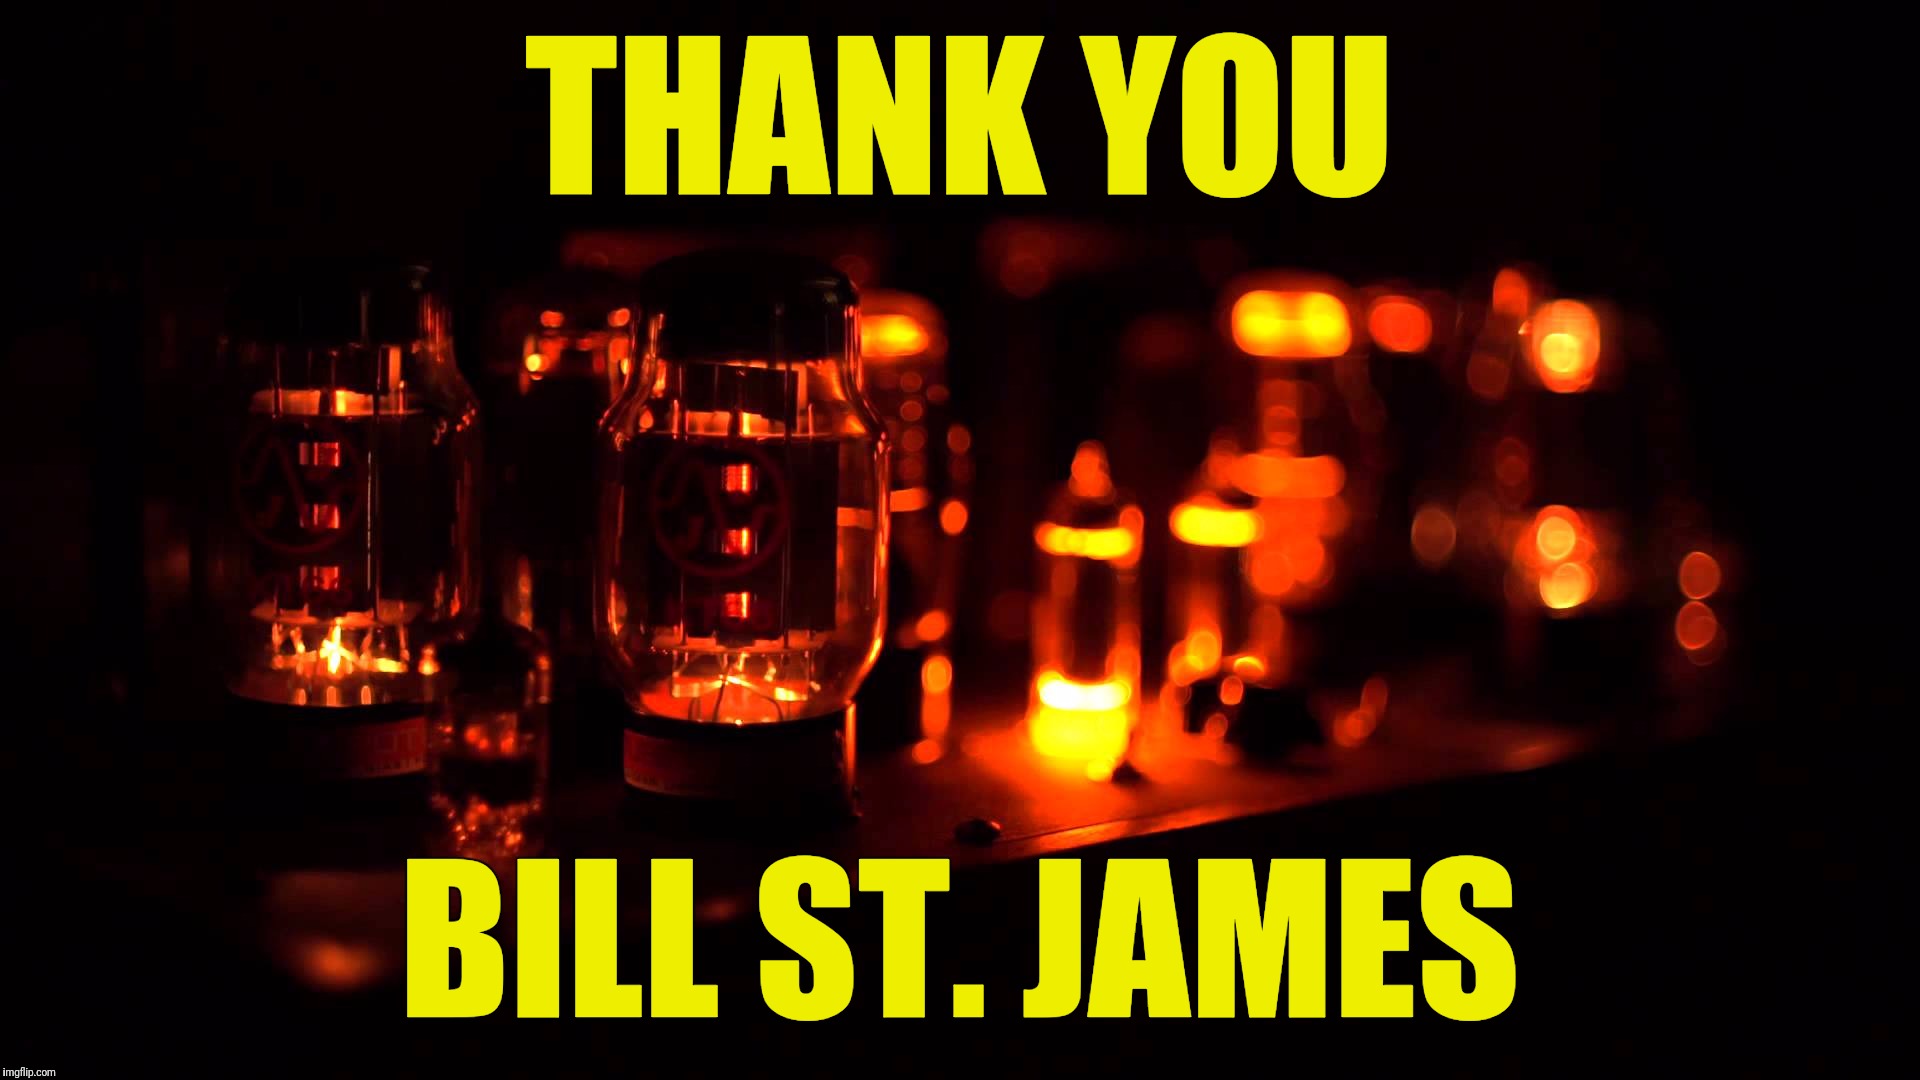 Every Sunday I like to turn on the old tube radio.  Not sure if I'm having a Flashback or in a Time Warp... | THANK YOU; BILL ST. JAMES | image tagged in memes,vacuum tube radio,flashback,time warp,bill st james | made w/ Imgflip meme maker